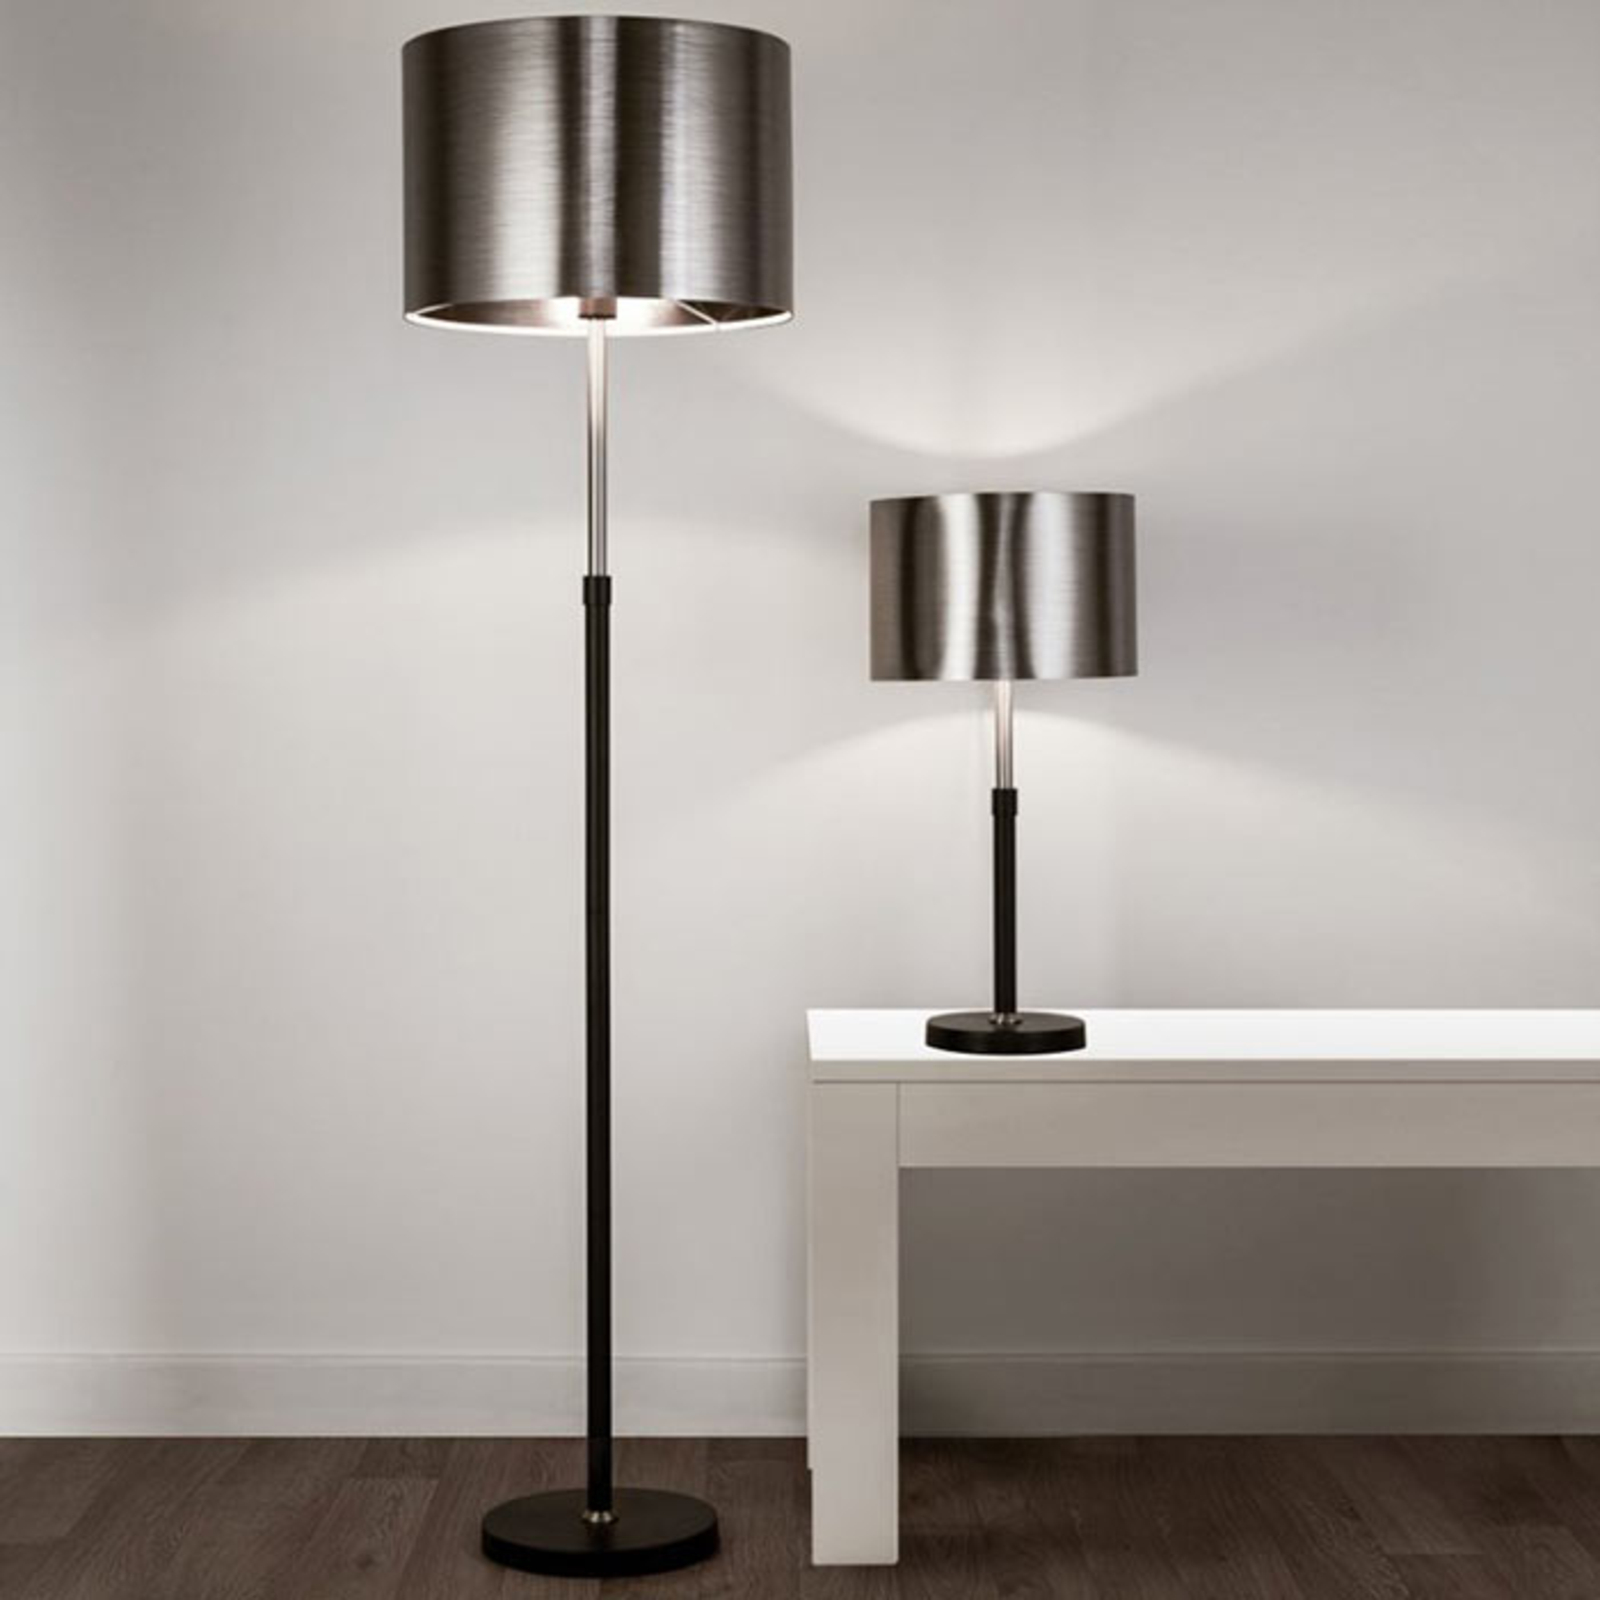 Column floor lamp with a metal lampshade